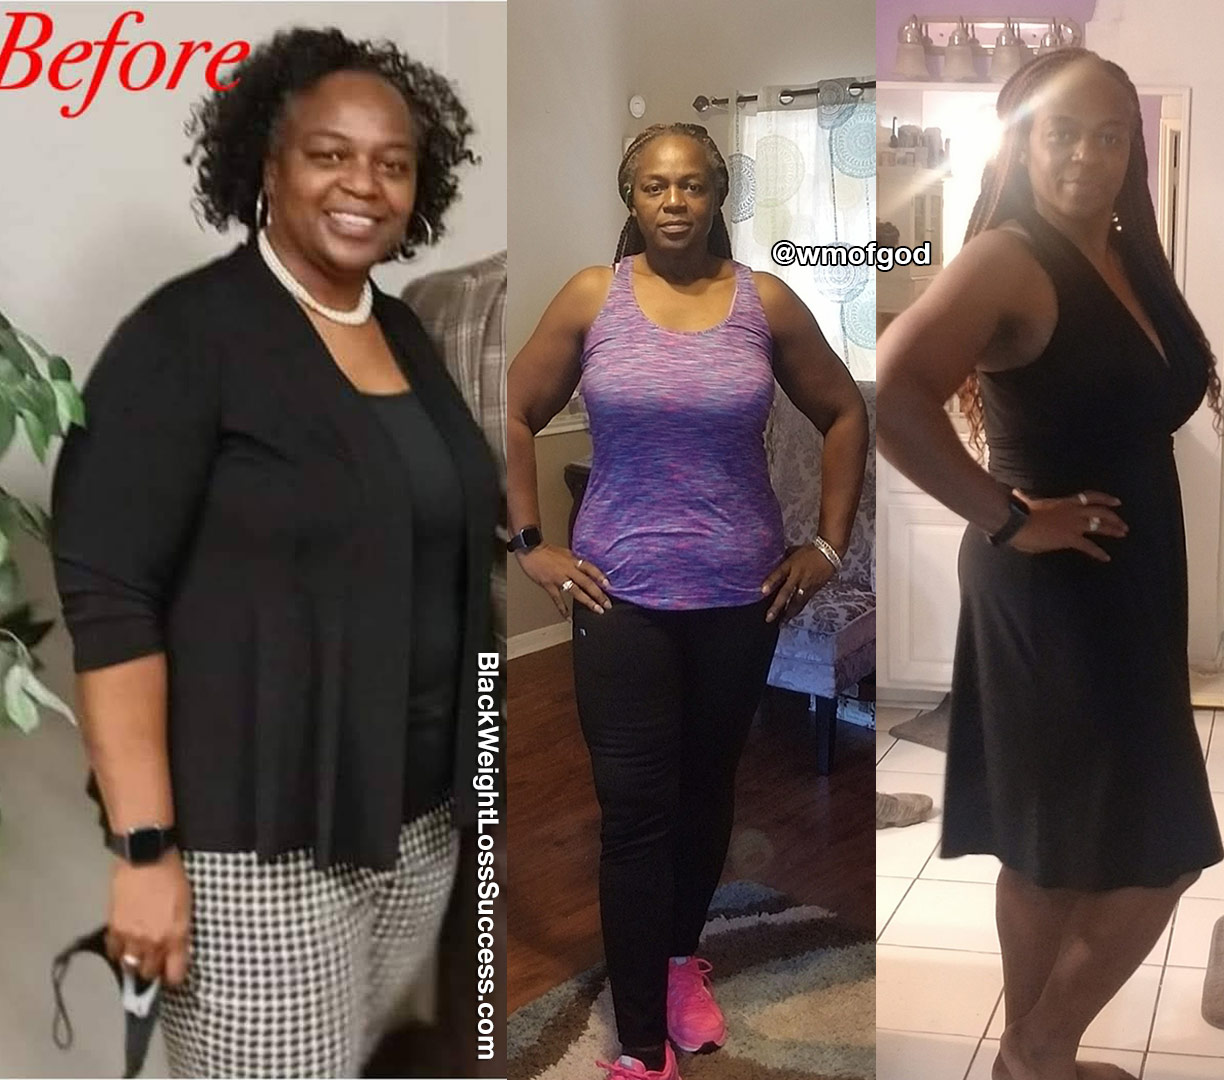 Lorinda before and after weight loss